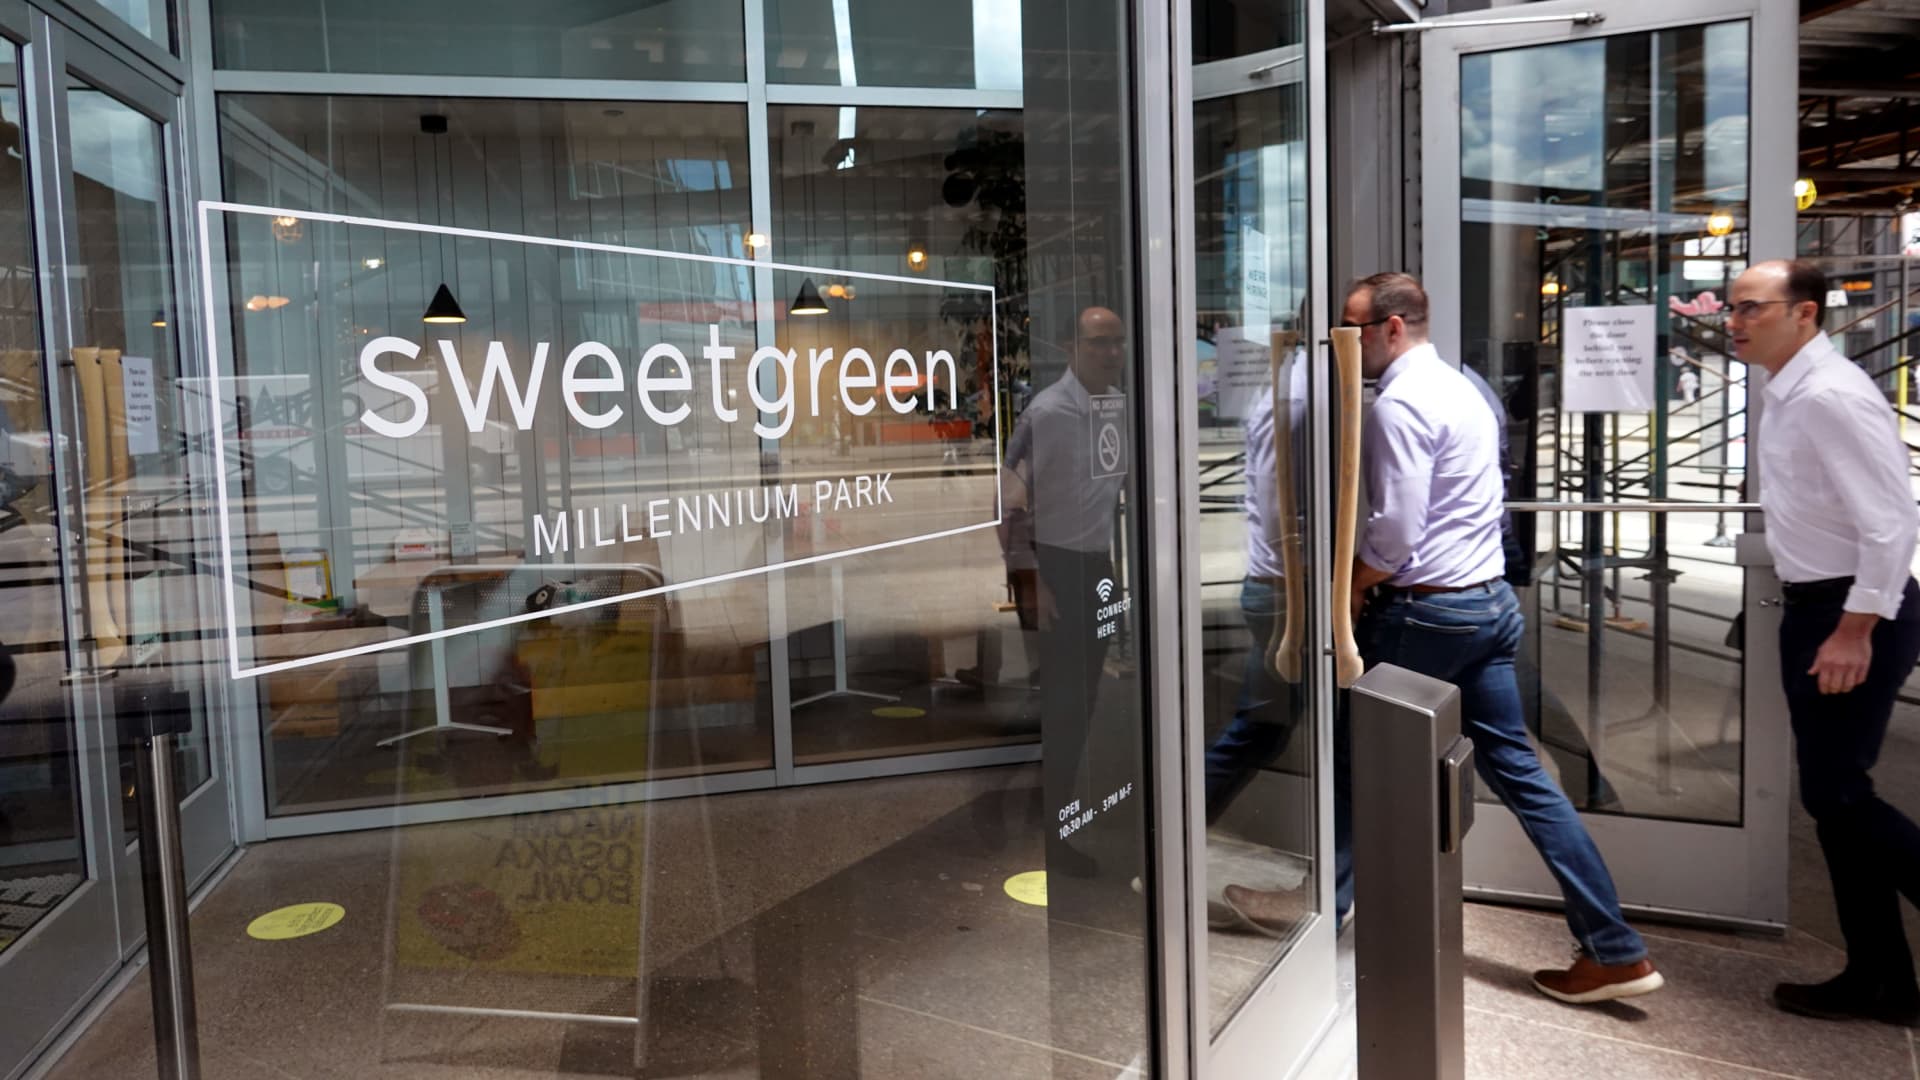 Sweetgreen shares tumble after salad chain reports weak sales but narrowing losses